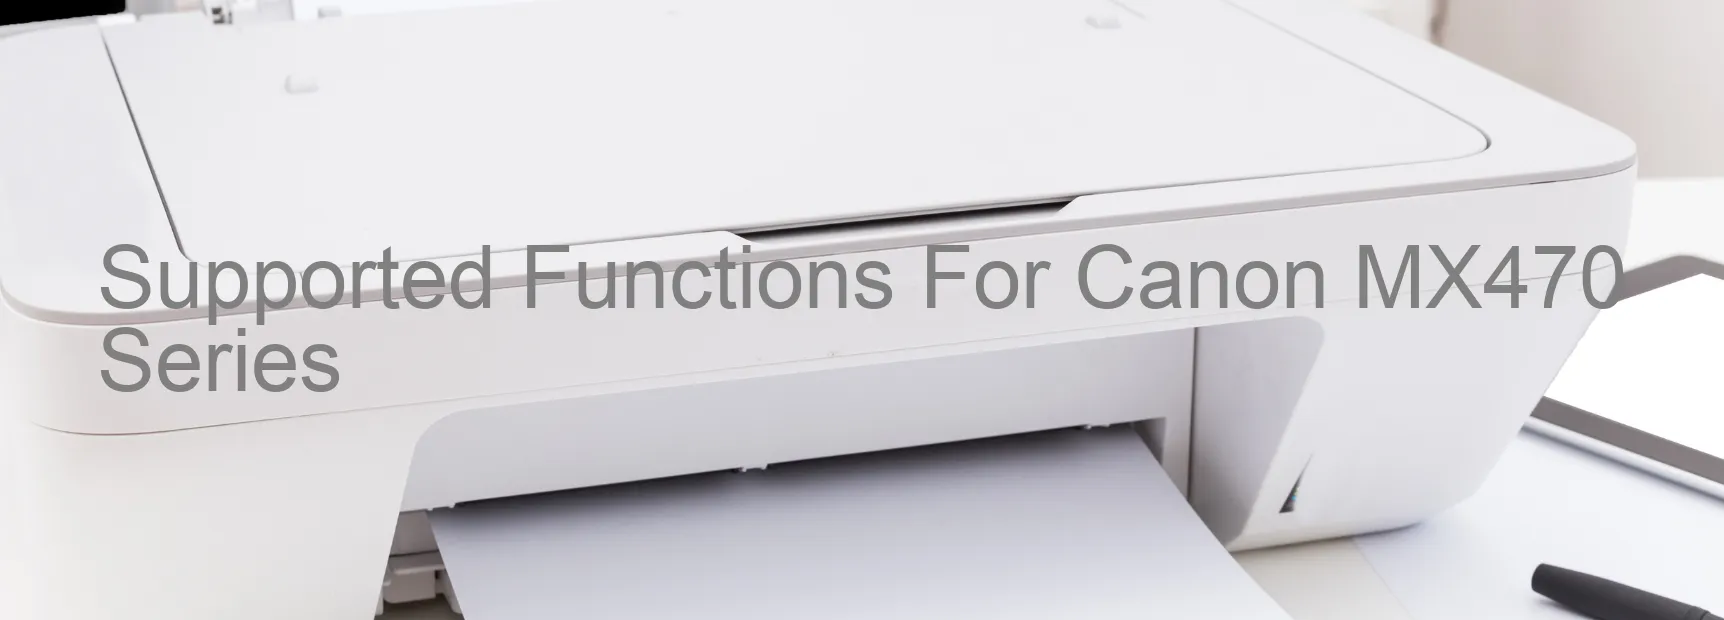 supported-functions-for-canon-mx470-series.webp